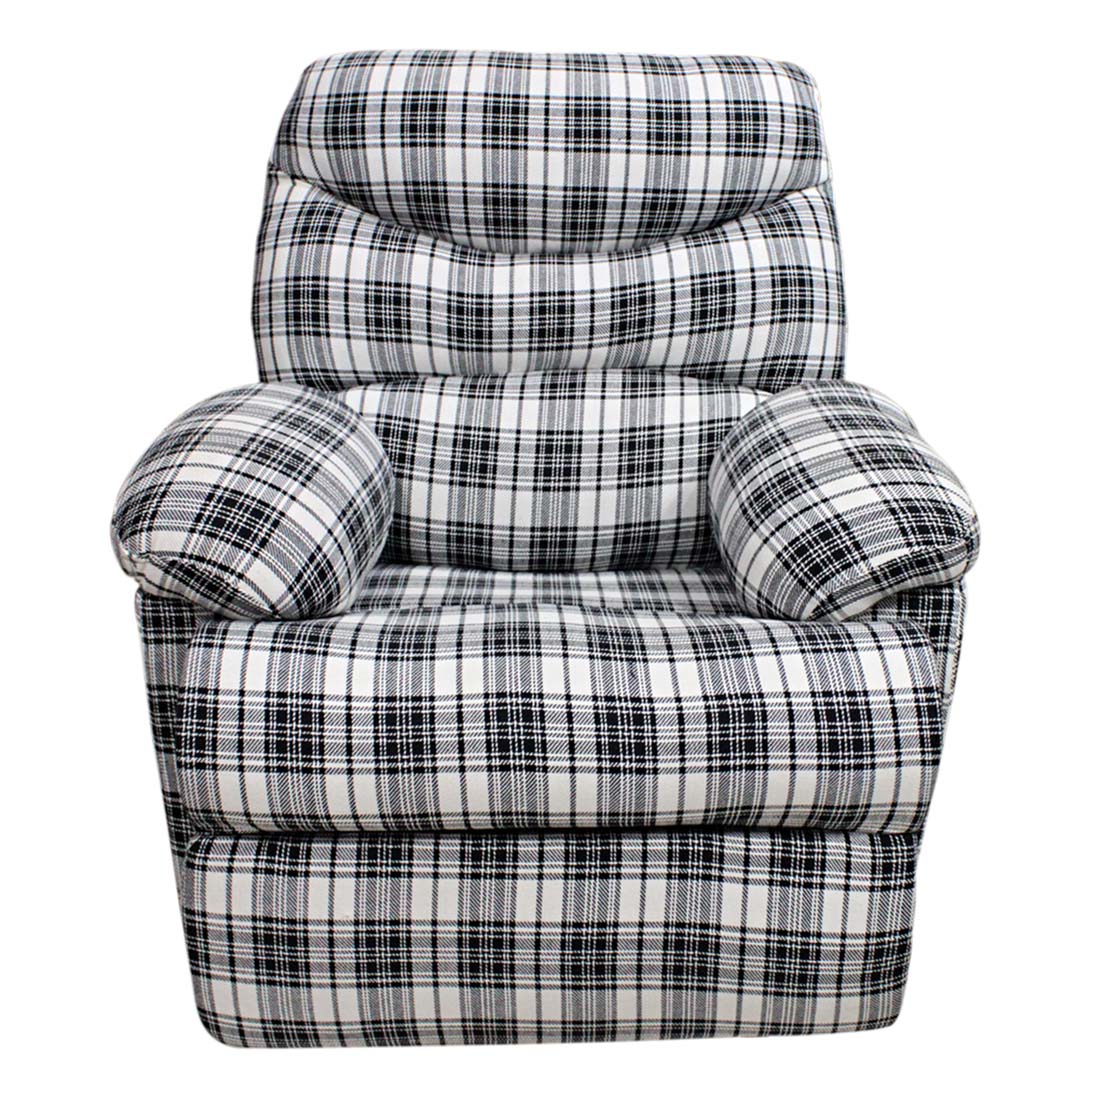 PRIMROSE Christie 3R Rocking And Revolving Recliner With Cotton Fabric - Black And White